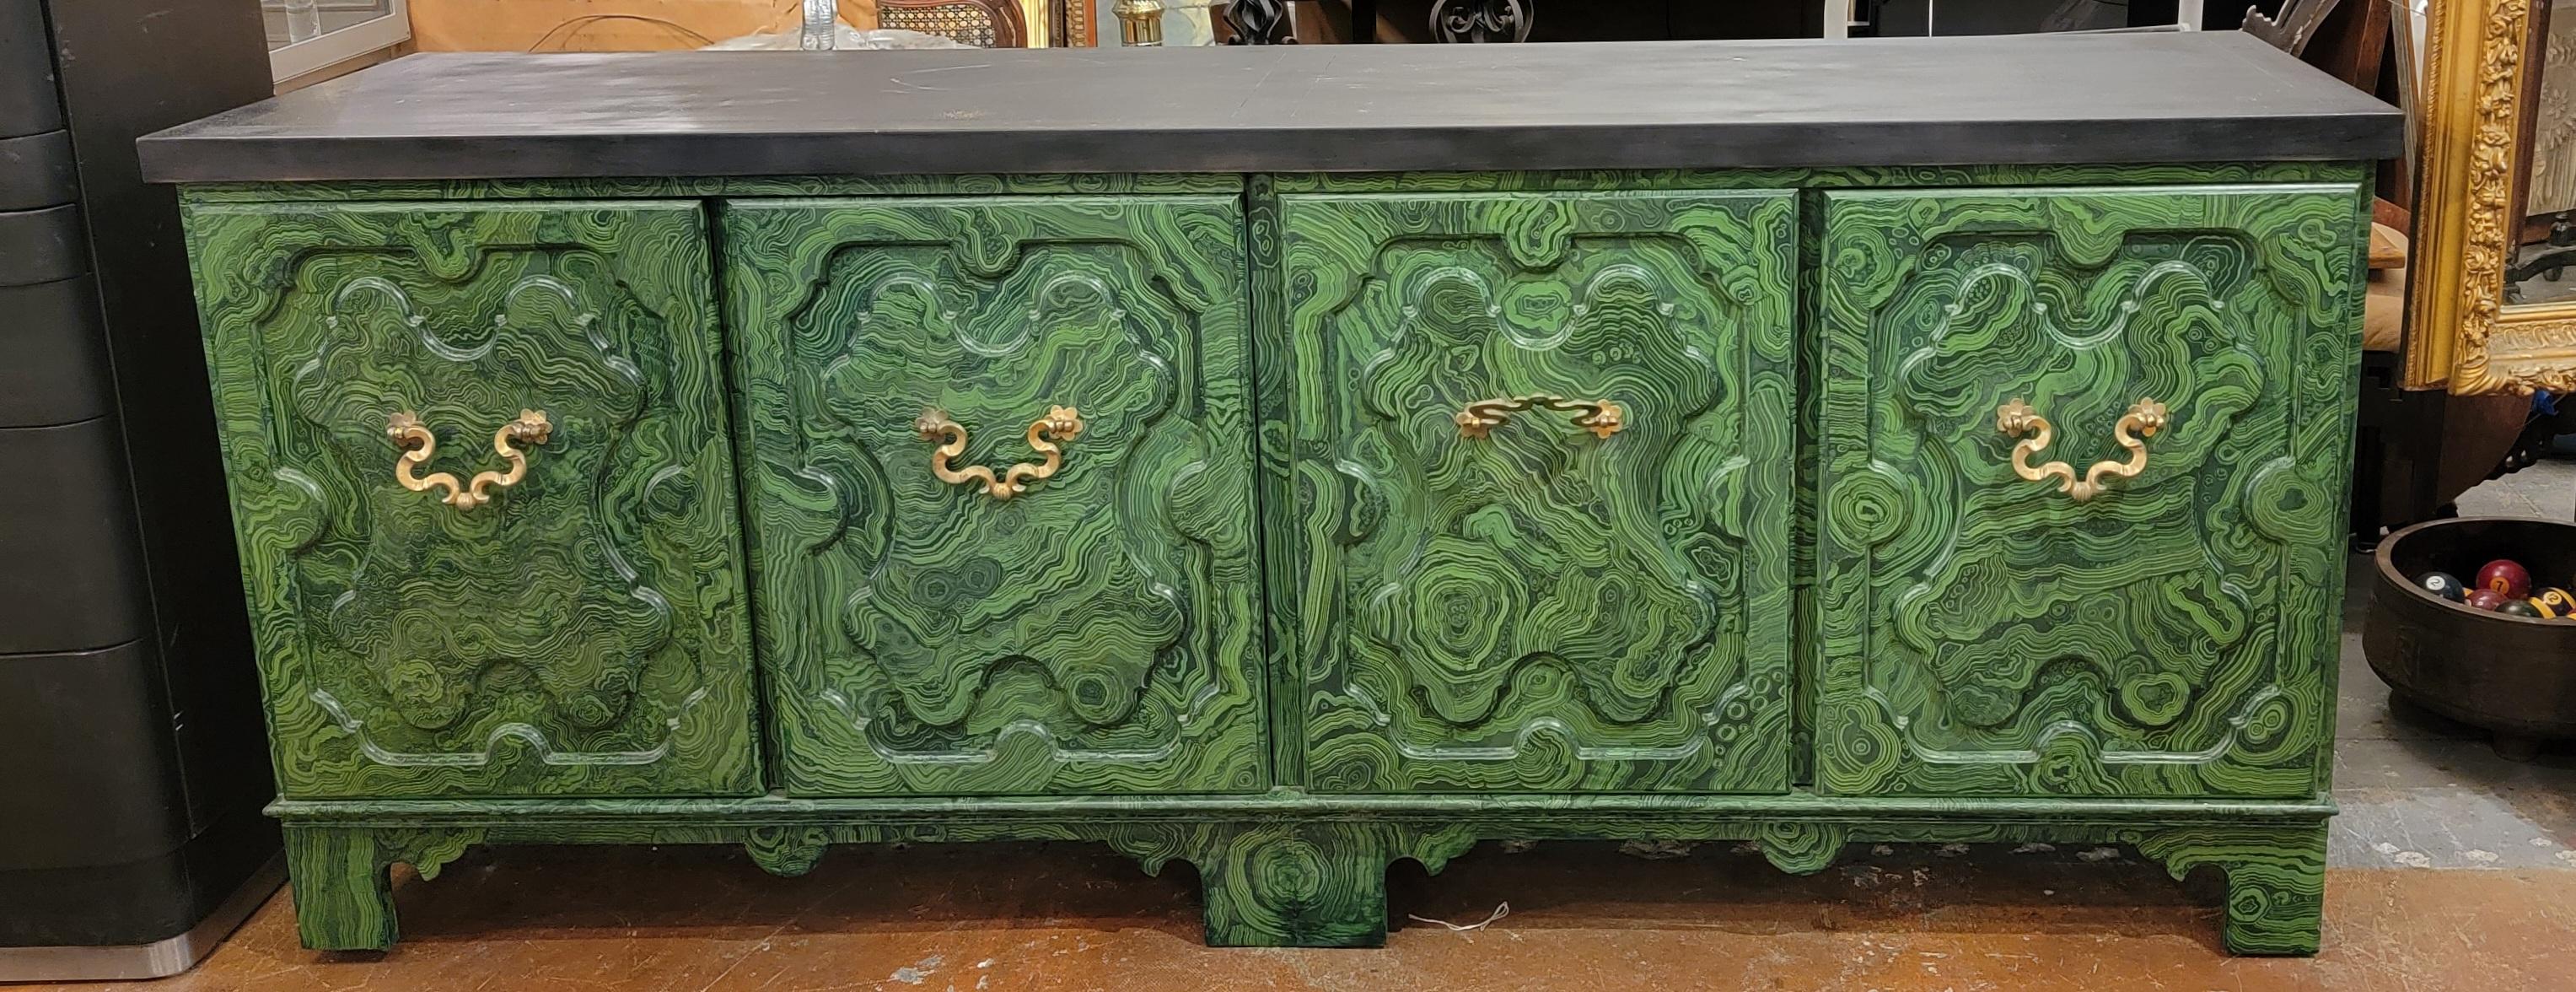 Mid-Century Modern Hand Painted Baker 4 Door Credenza With Ornate Brass Handles by Tony Duquette